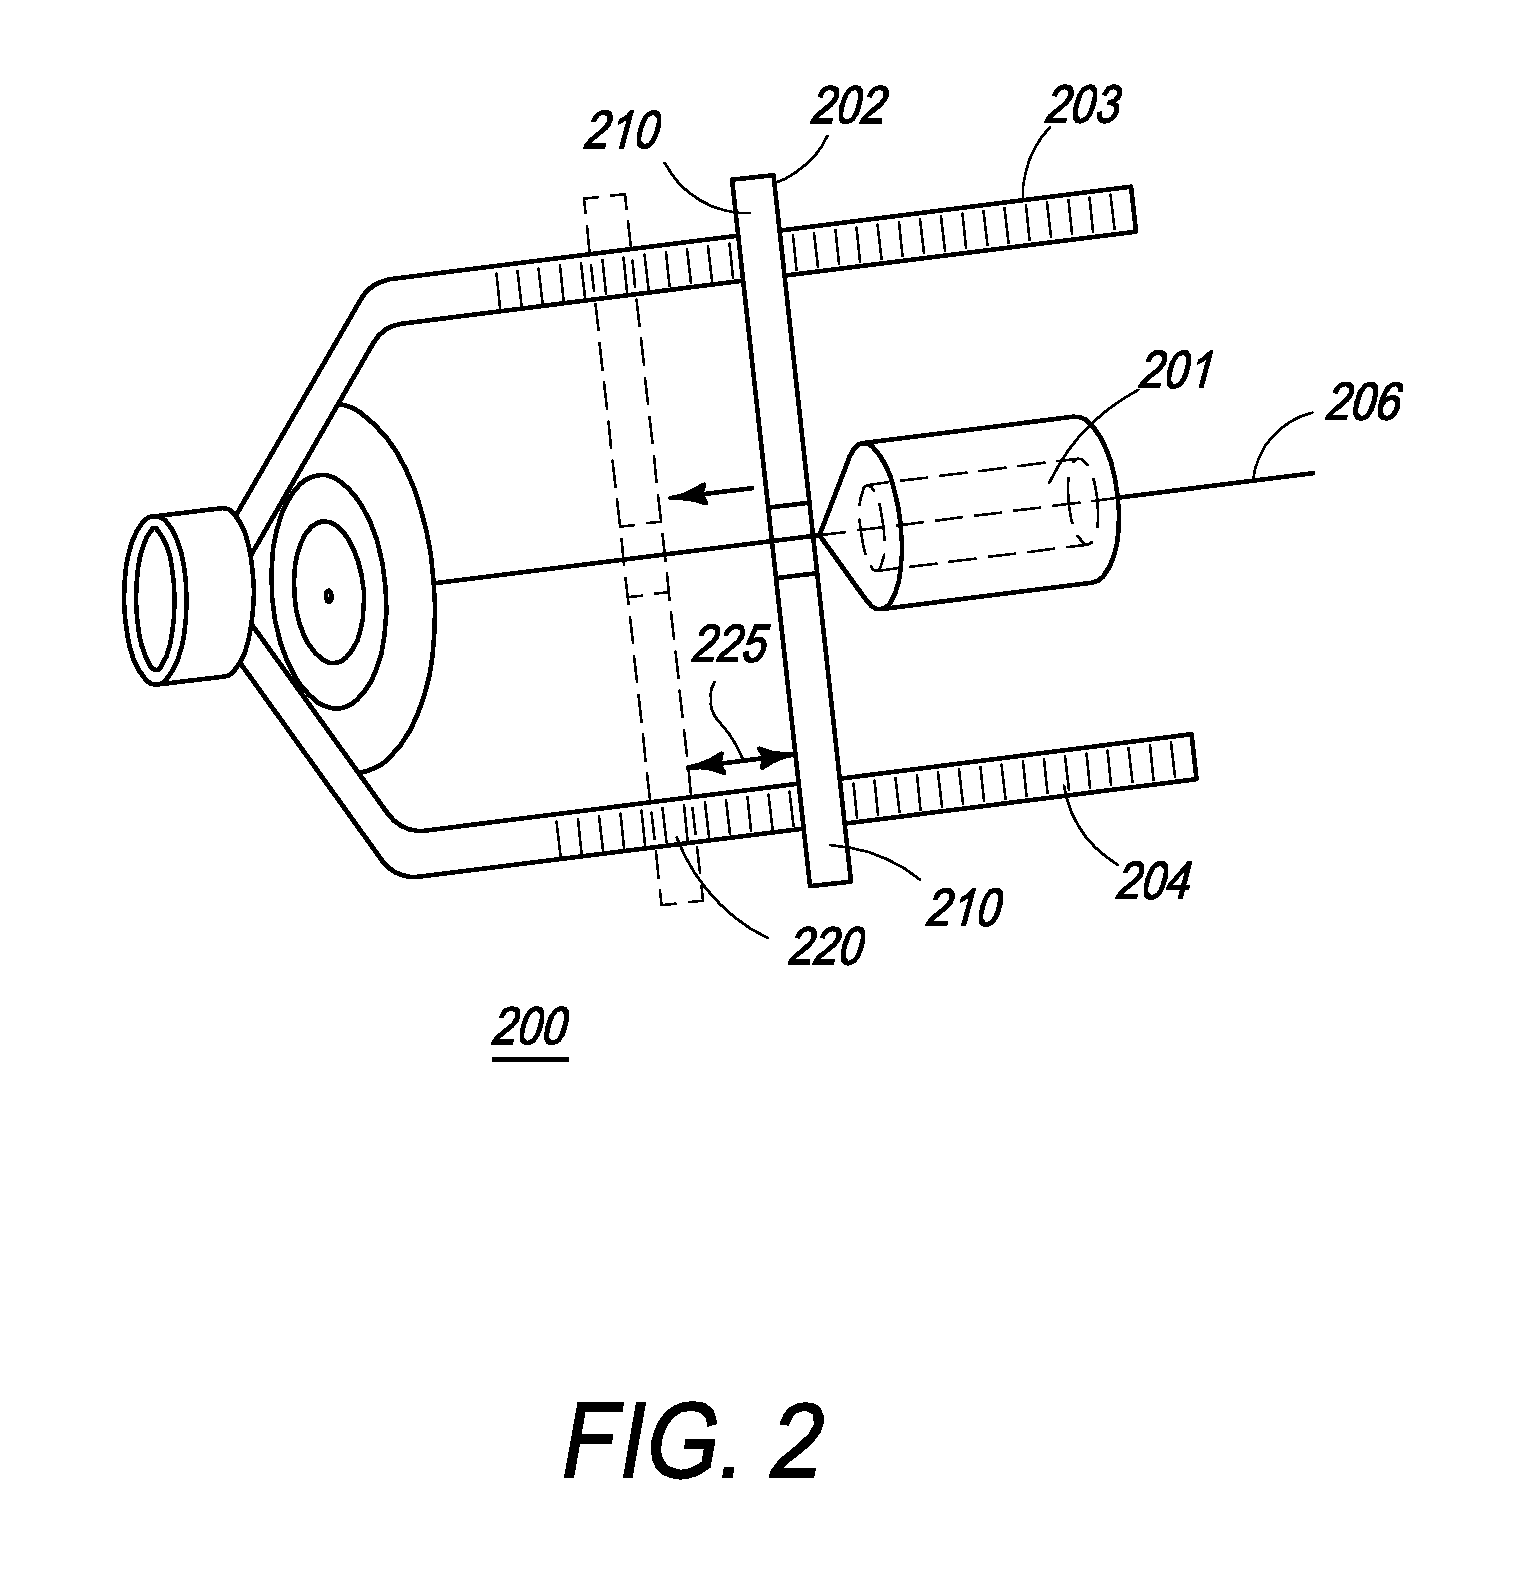 Device for measuring blockage length in a blood vessel